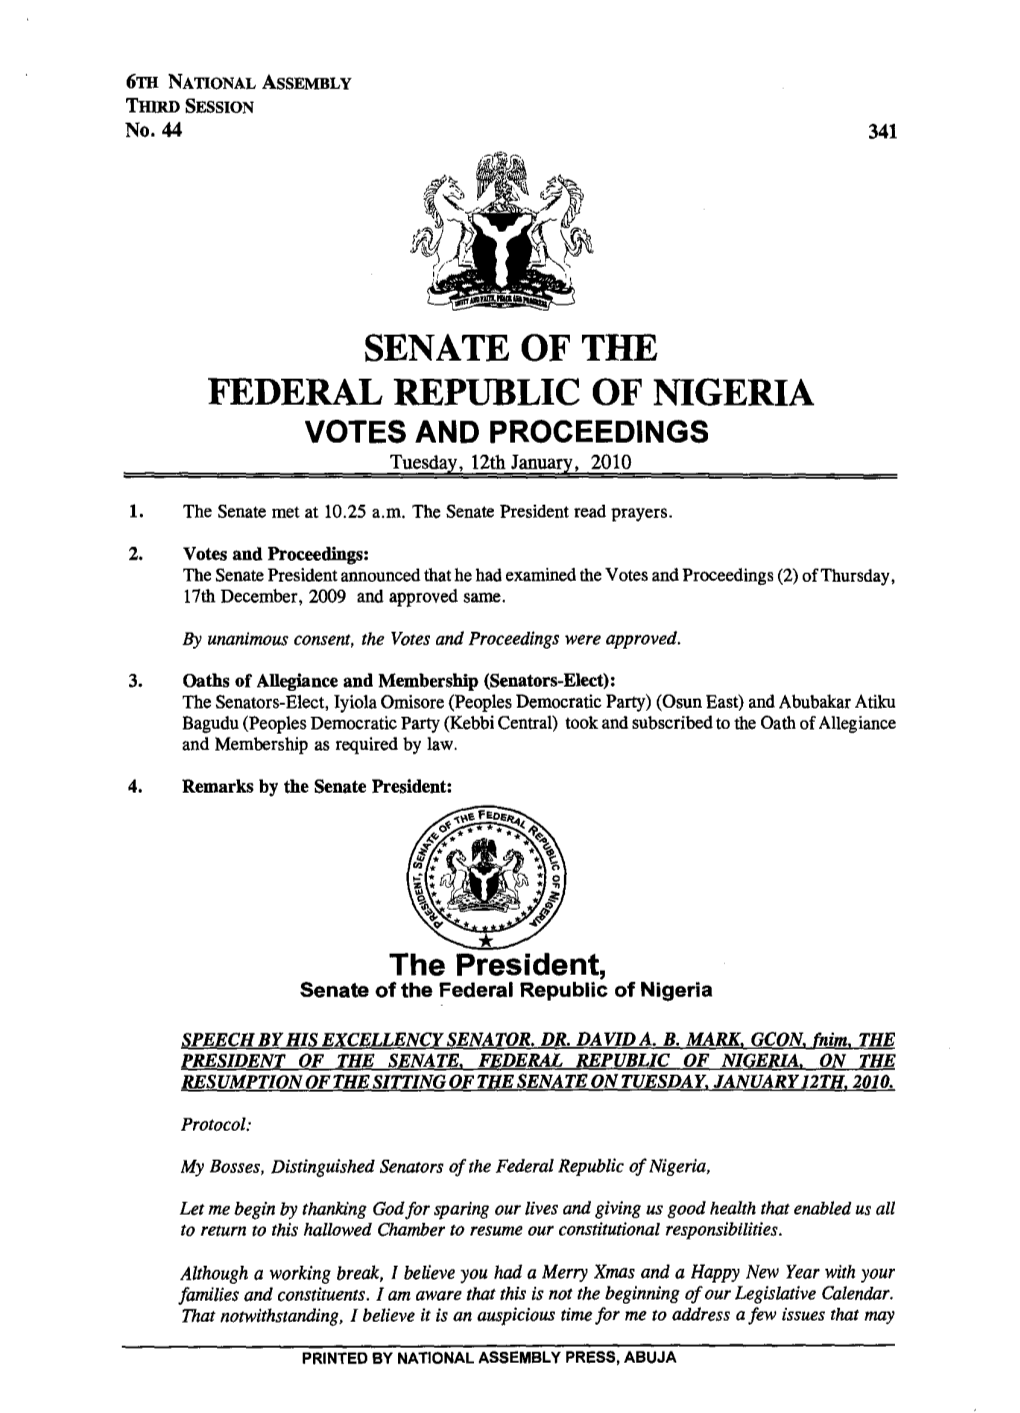 SENATE of the FEDERAL REPUBLIC of NIGERIA VOTES and PROCEEDINGS Tuesday, 12Th January, 2010